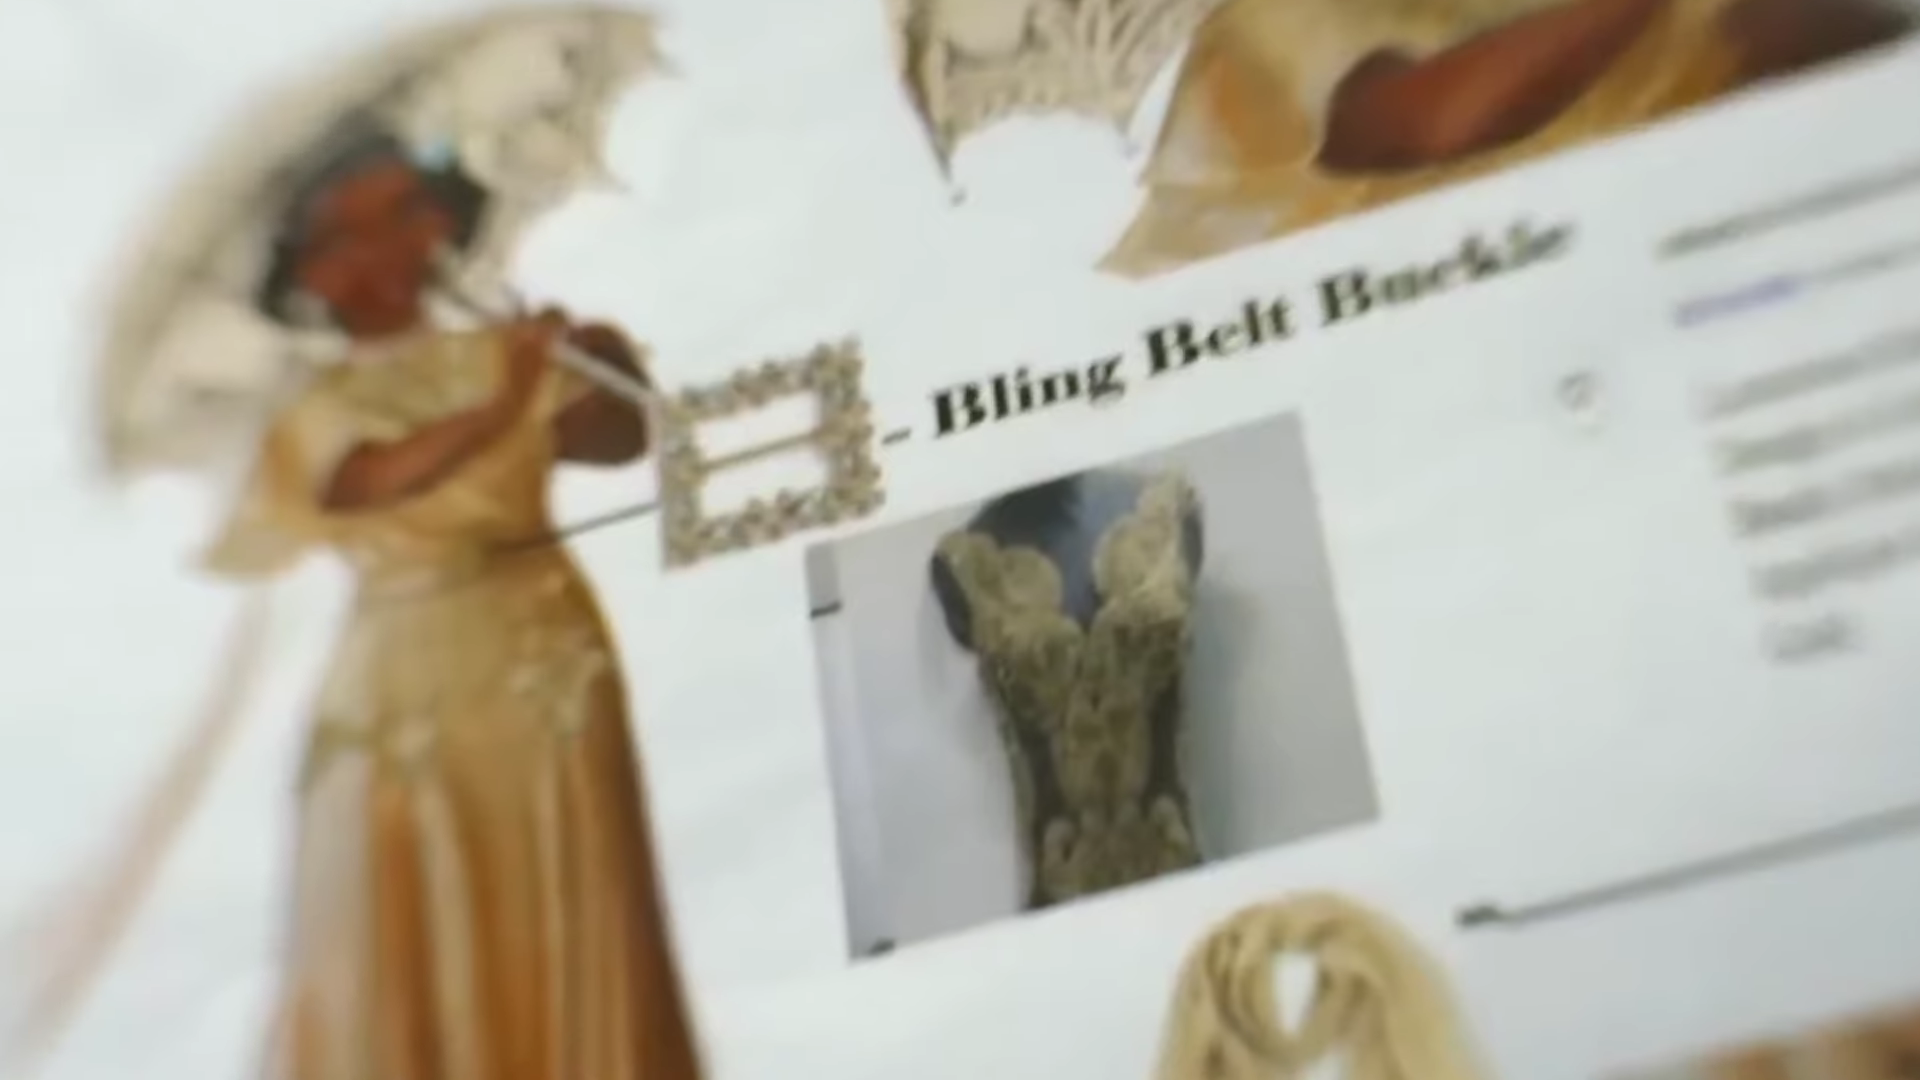 A blurred, brief glimpse in a video of a page filled with images related to an animatronic and its dress.